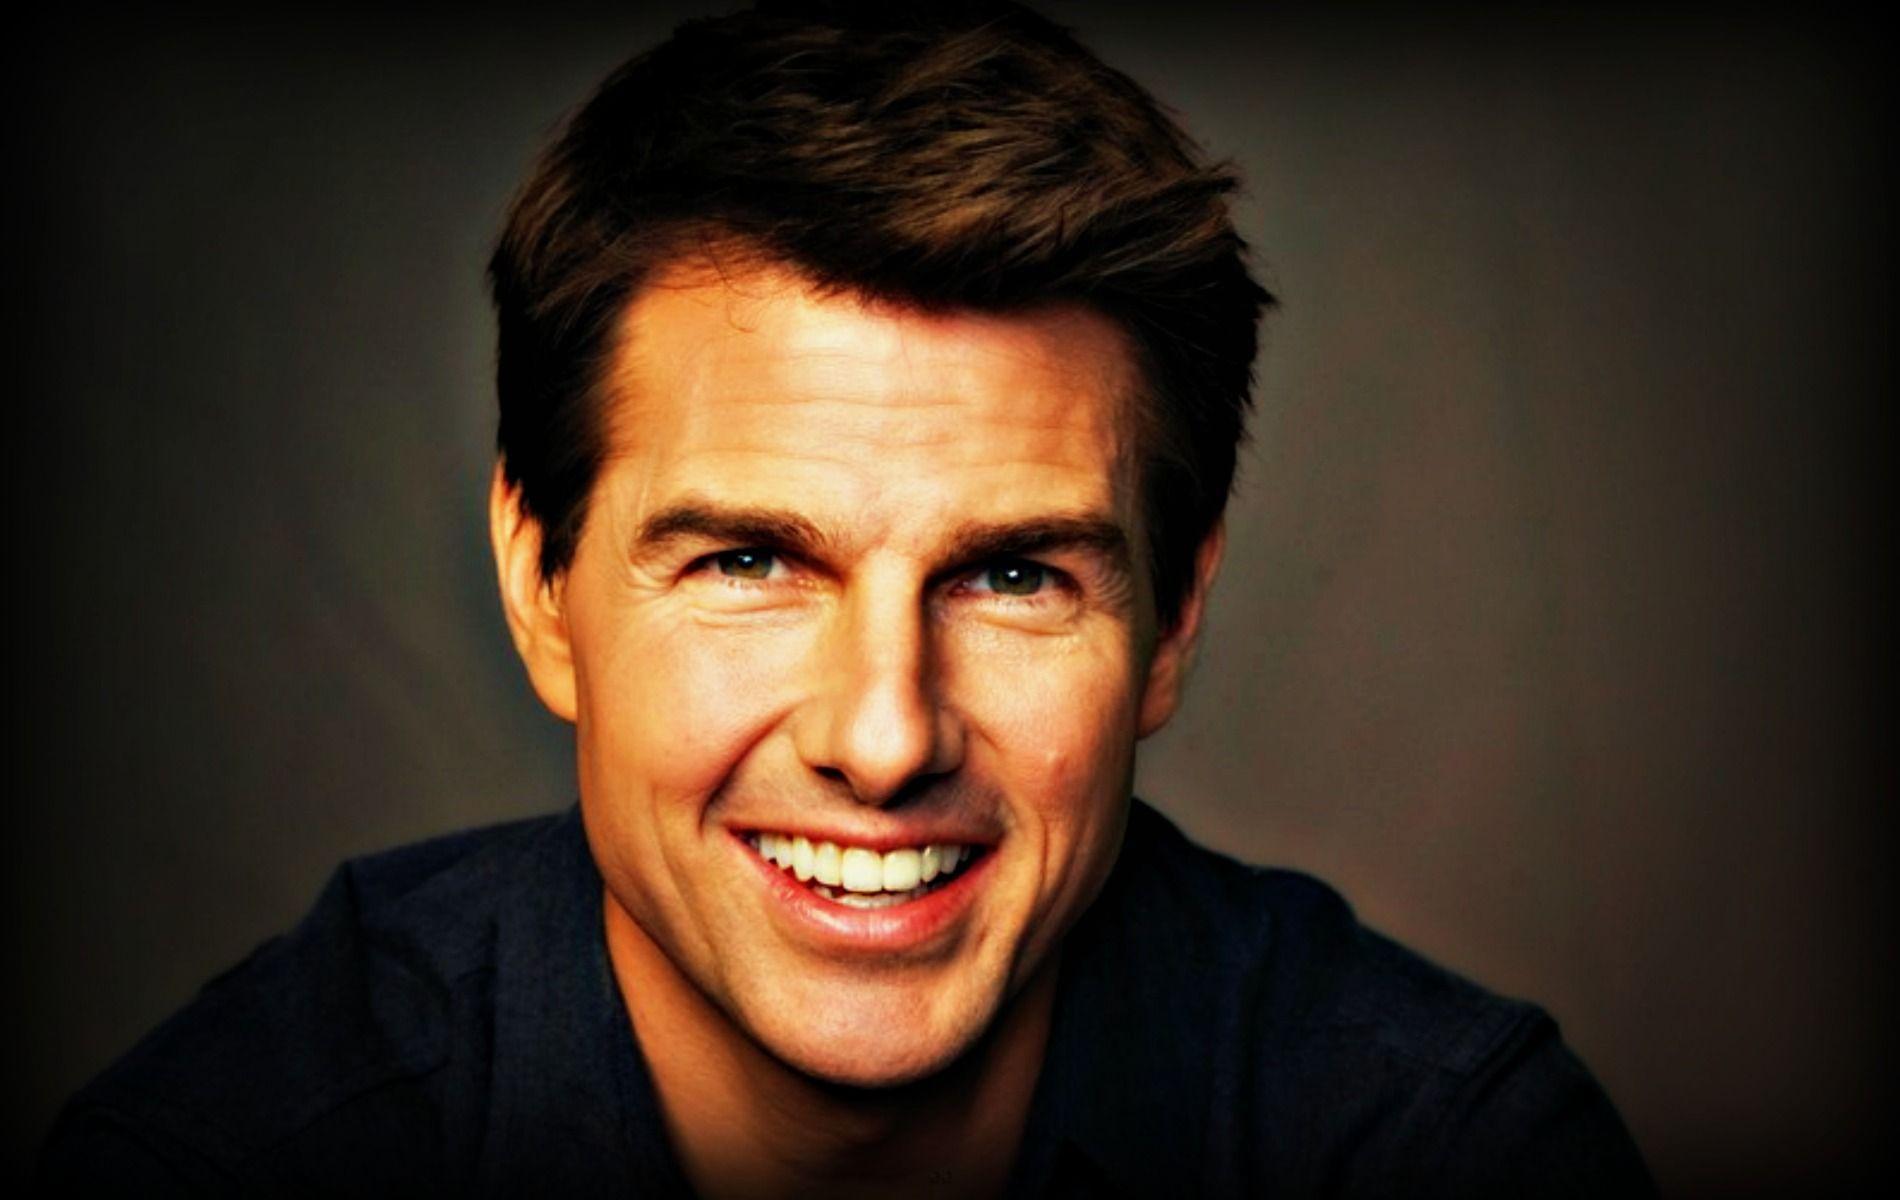 Tom Cruise Wallpaper High Resolution and Quality DownloadTom Cruise